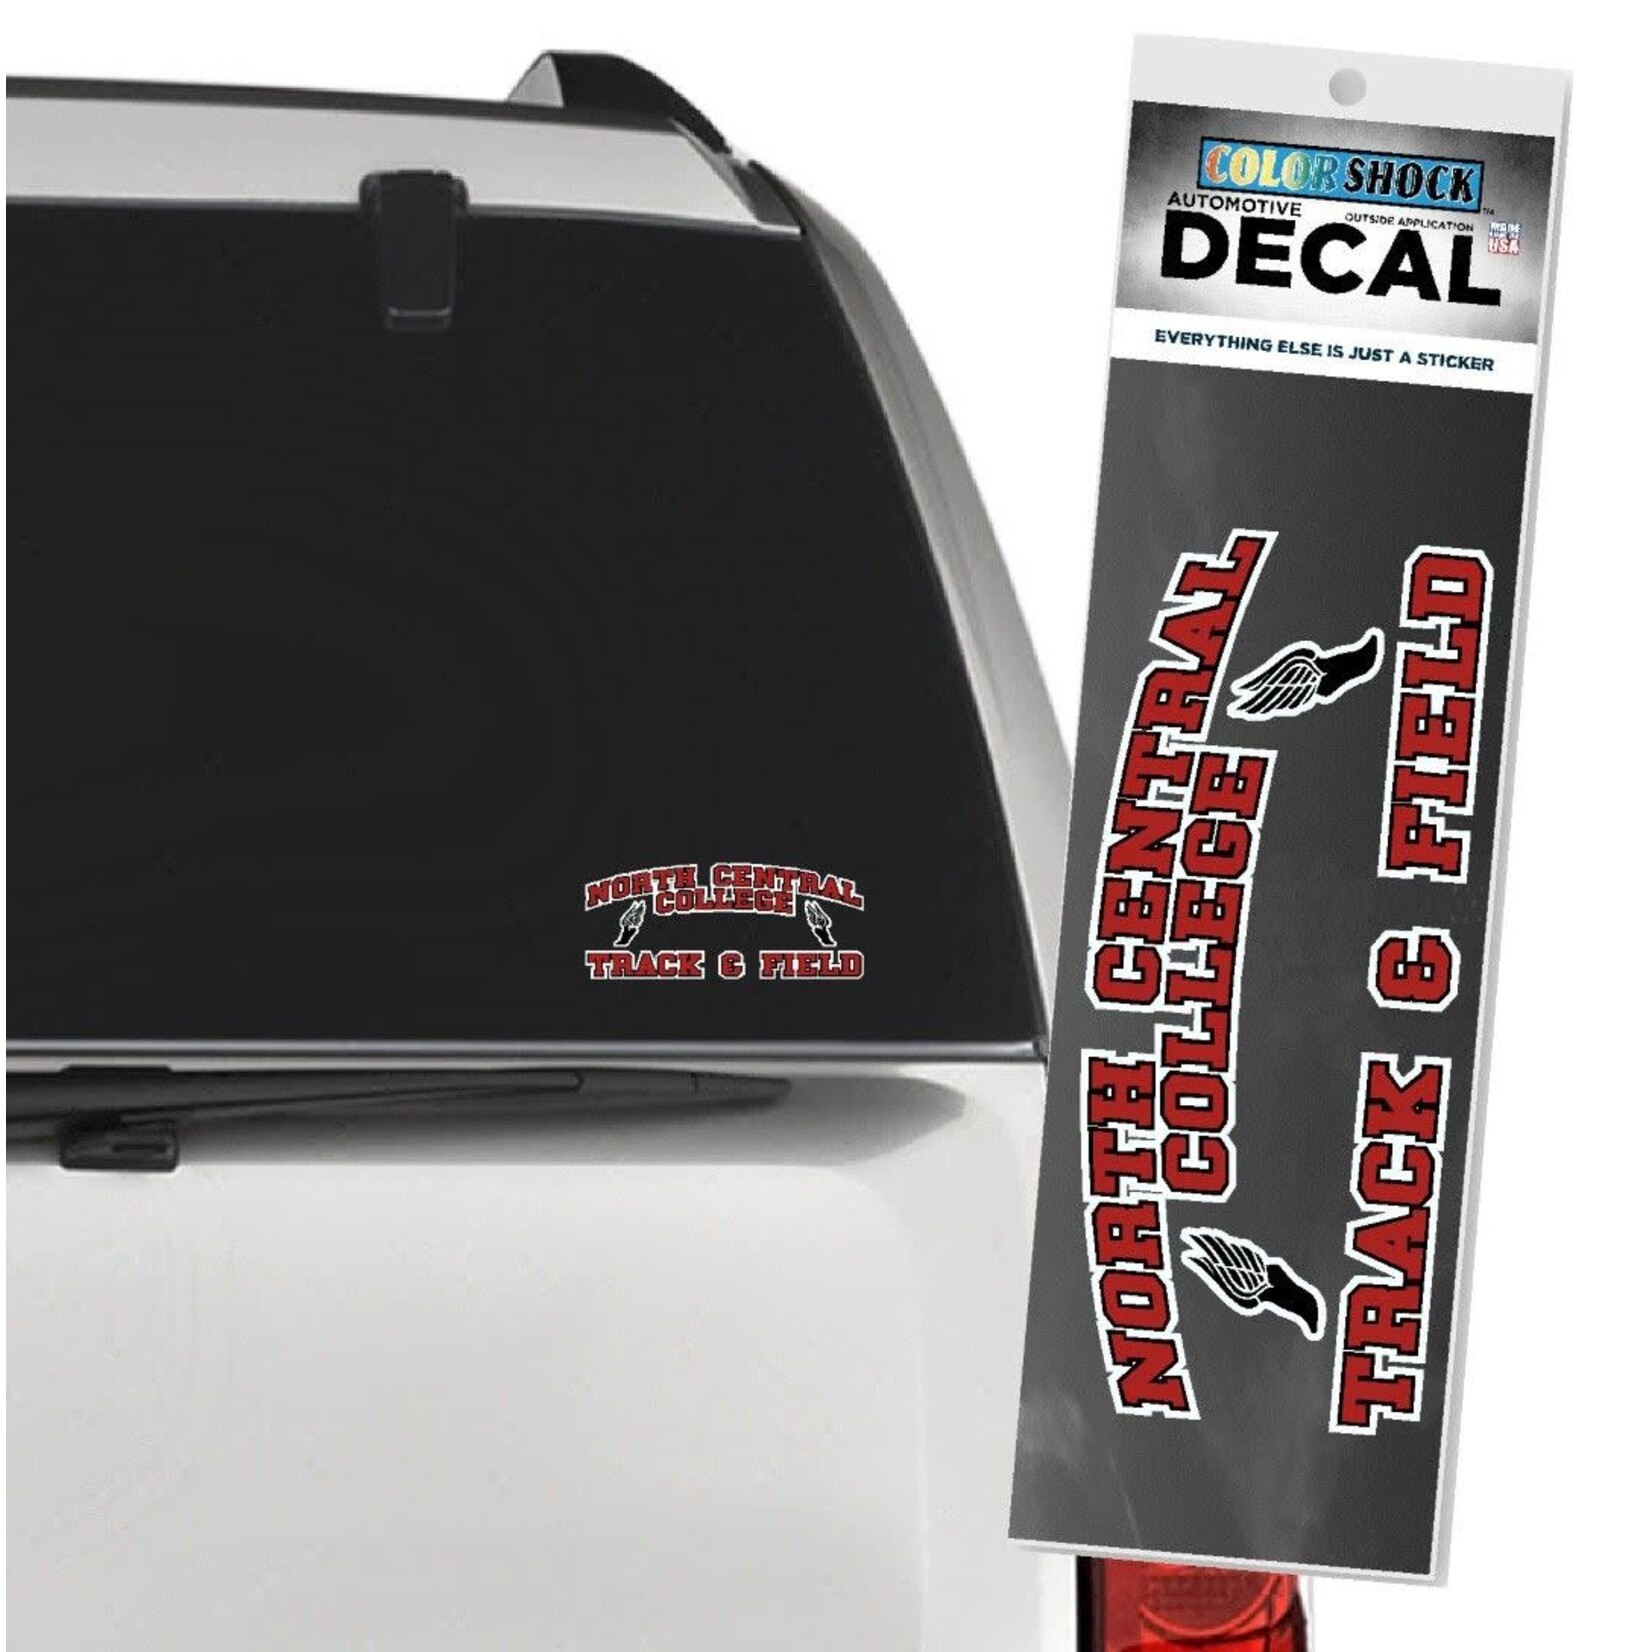 CDI Corporation Decal by Colorshock with Team Names  Track & Field